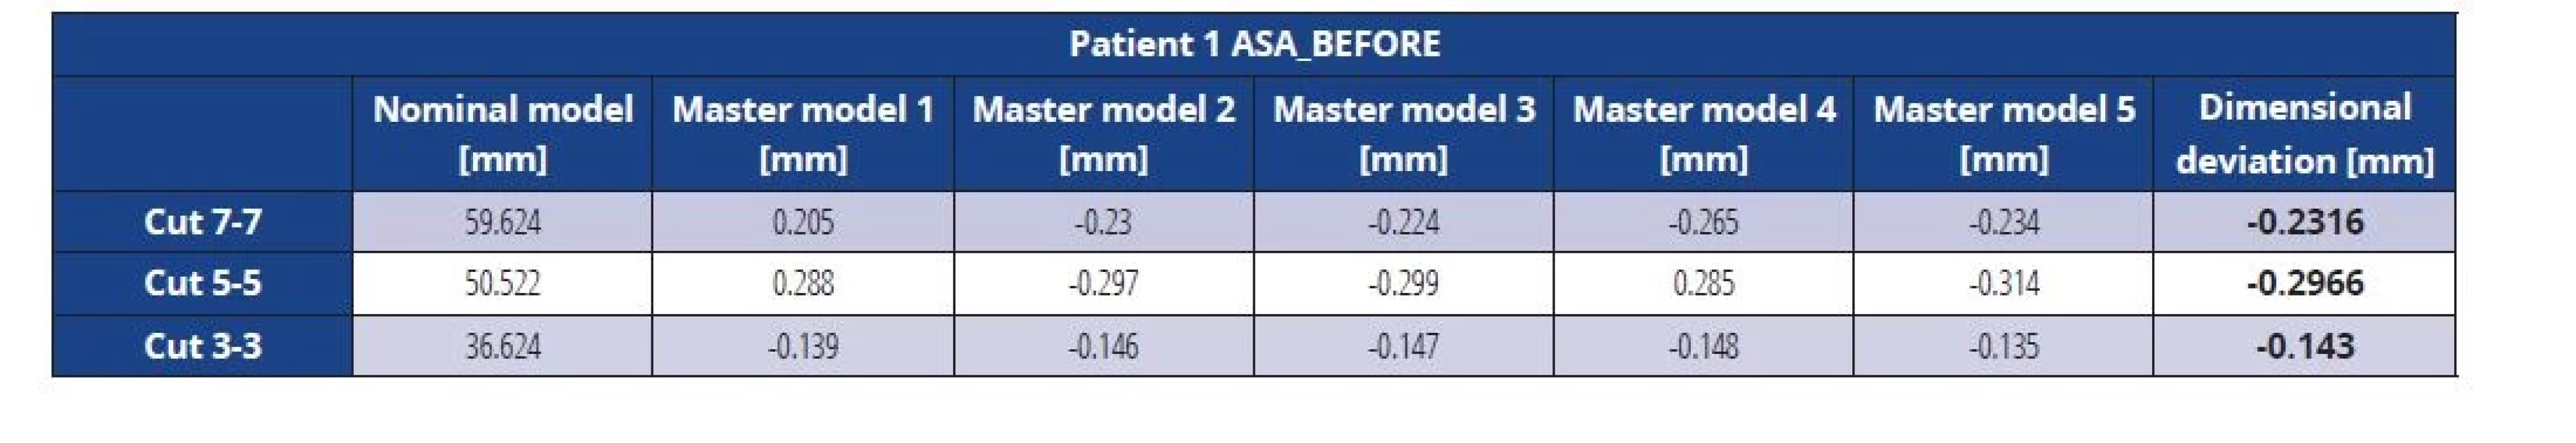 Dimensional deviations of the ASA master model before vacuuming (patient 1)